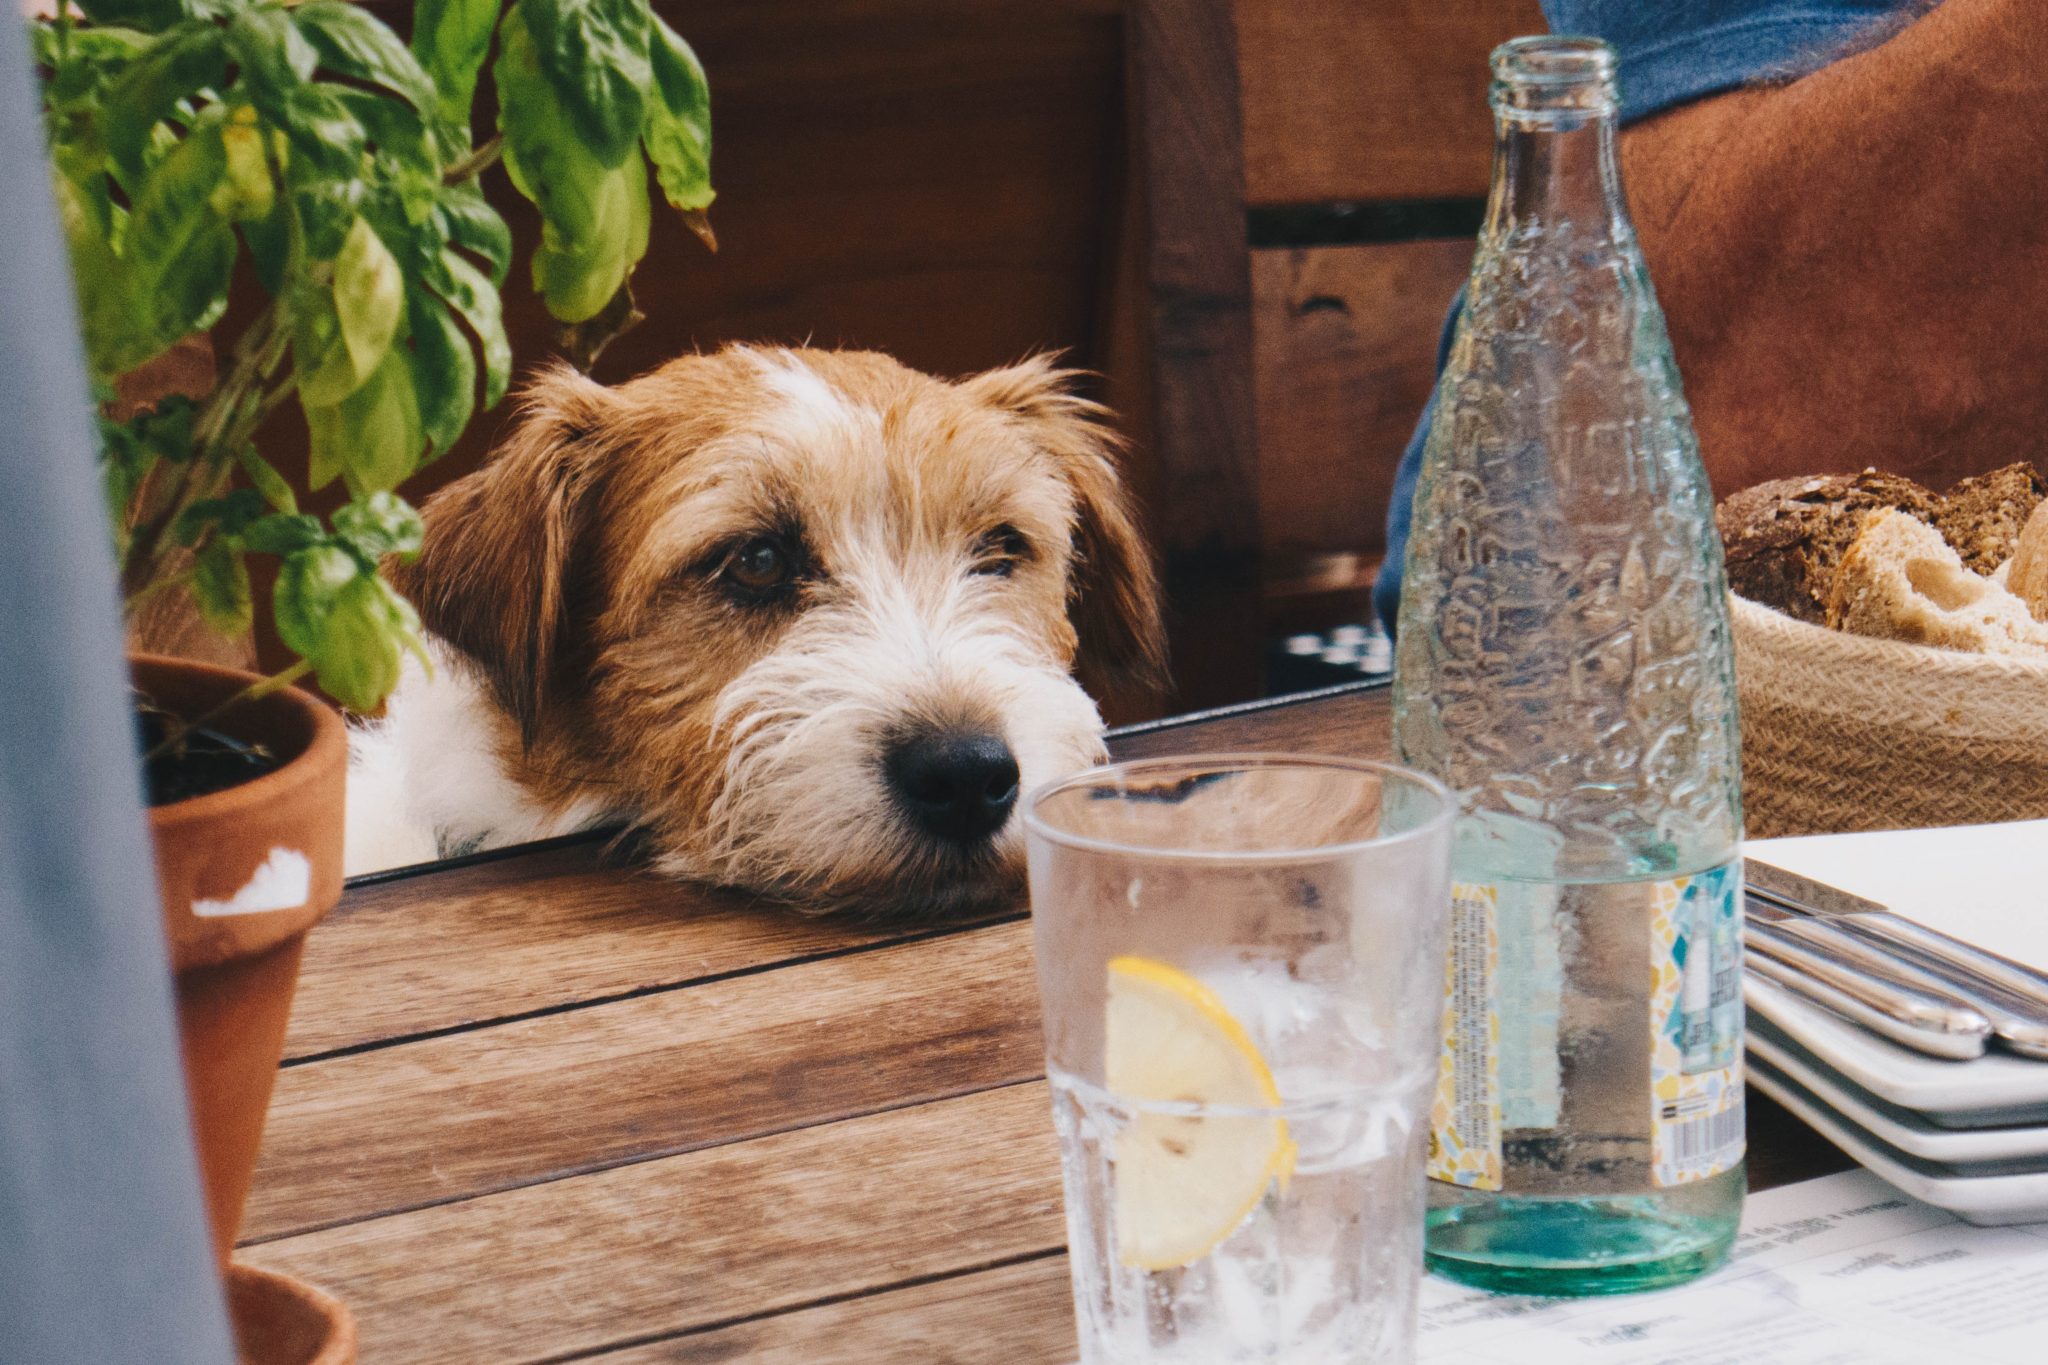 Jack Russell Terrier in need of water looks longingly at bottle of water on a table.